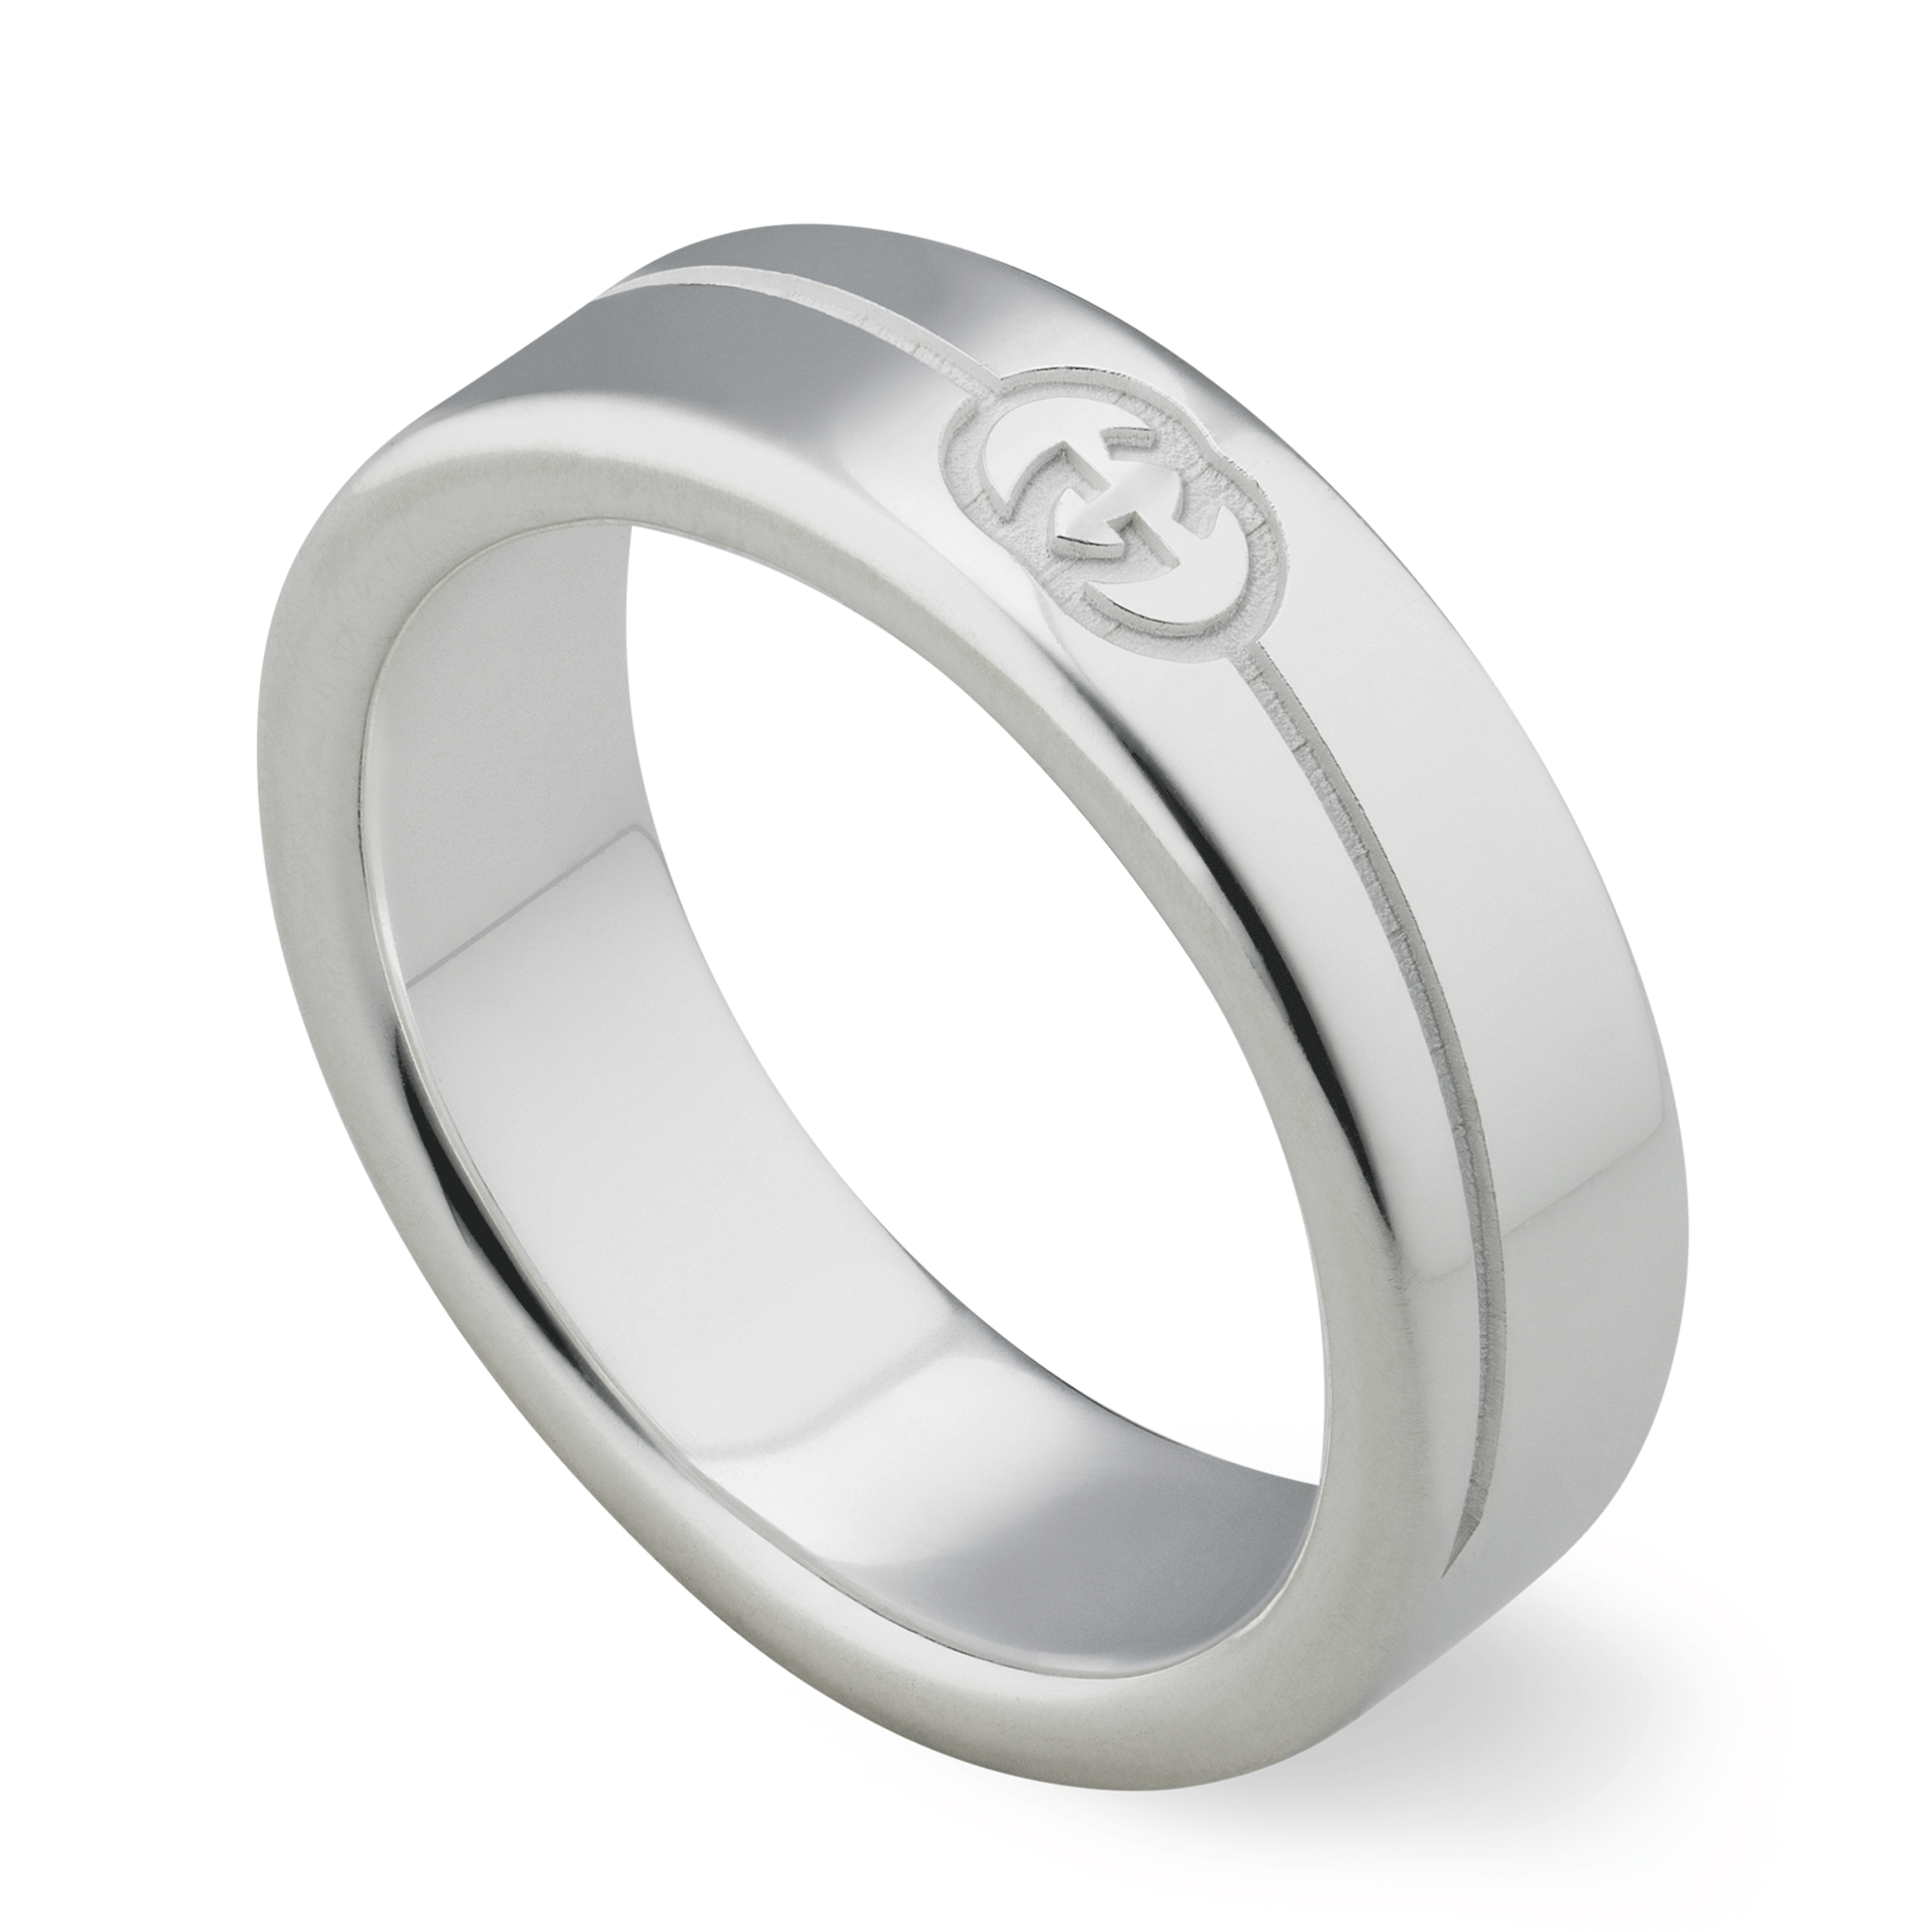 Tag Sterling Silver  With Interlocking G Logo Ring